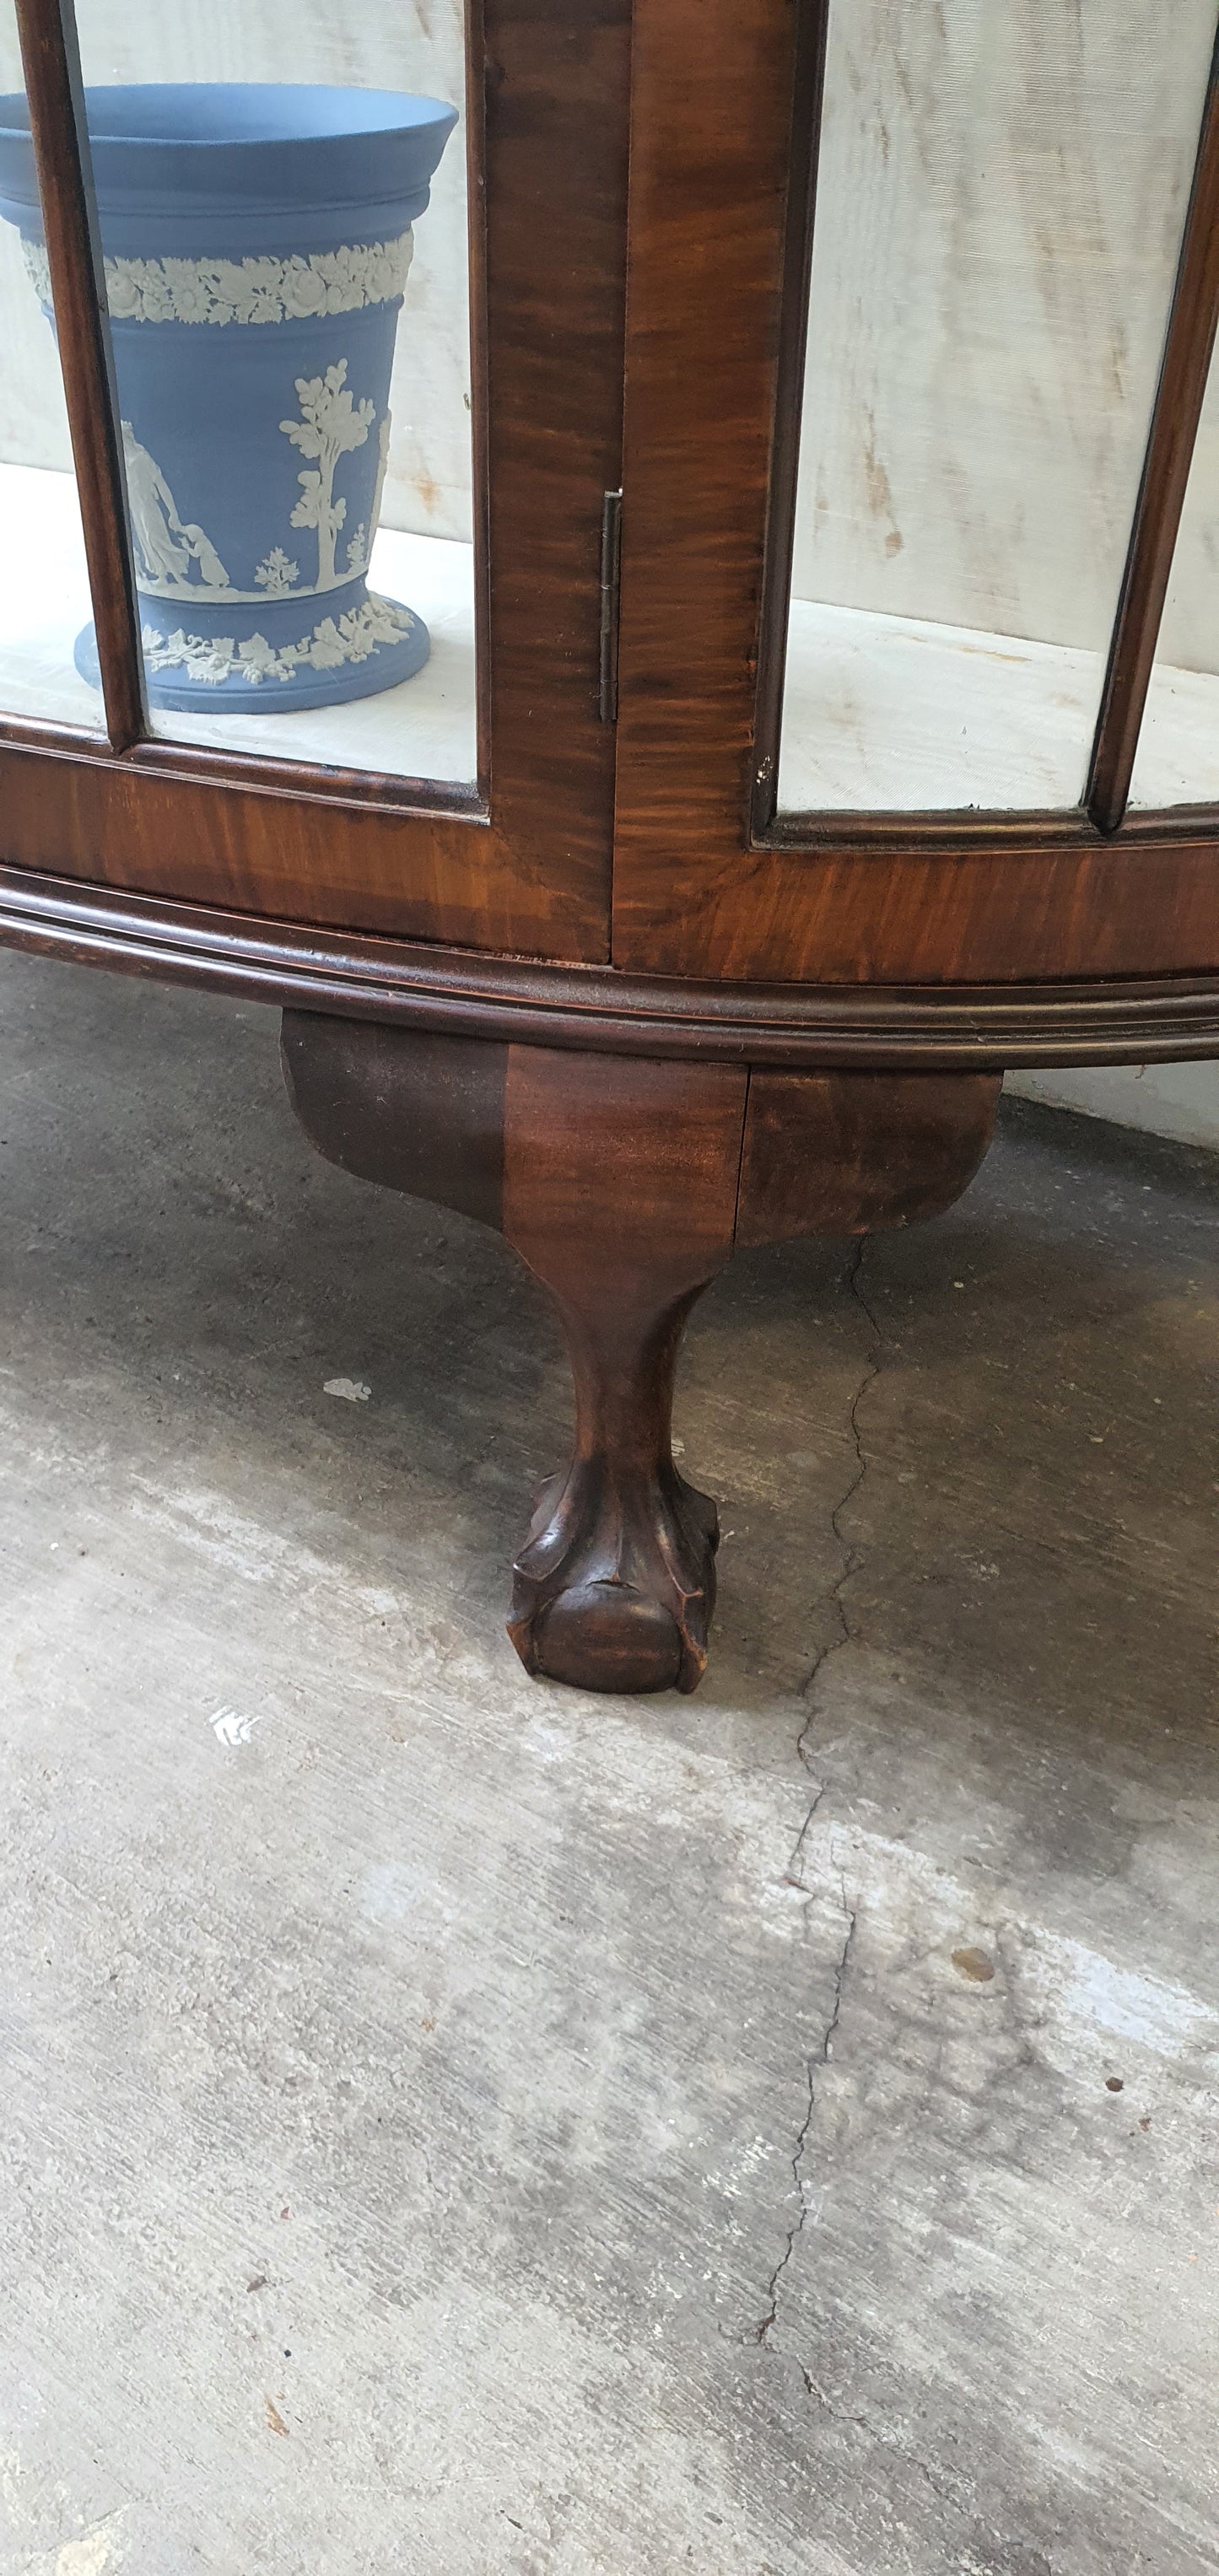 1900-1910 Bow front Mahogany Display cabinet with Ball Claw feet